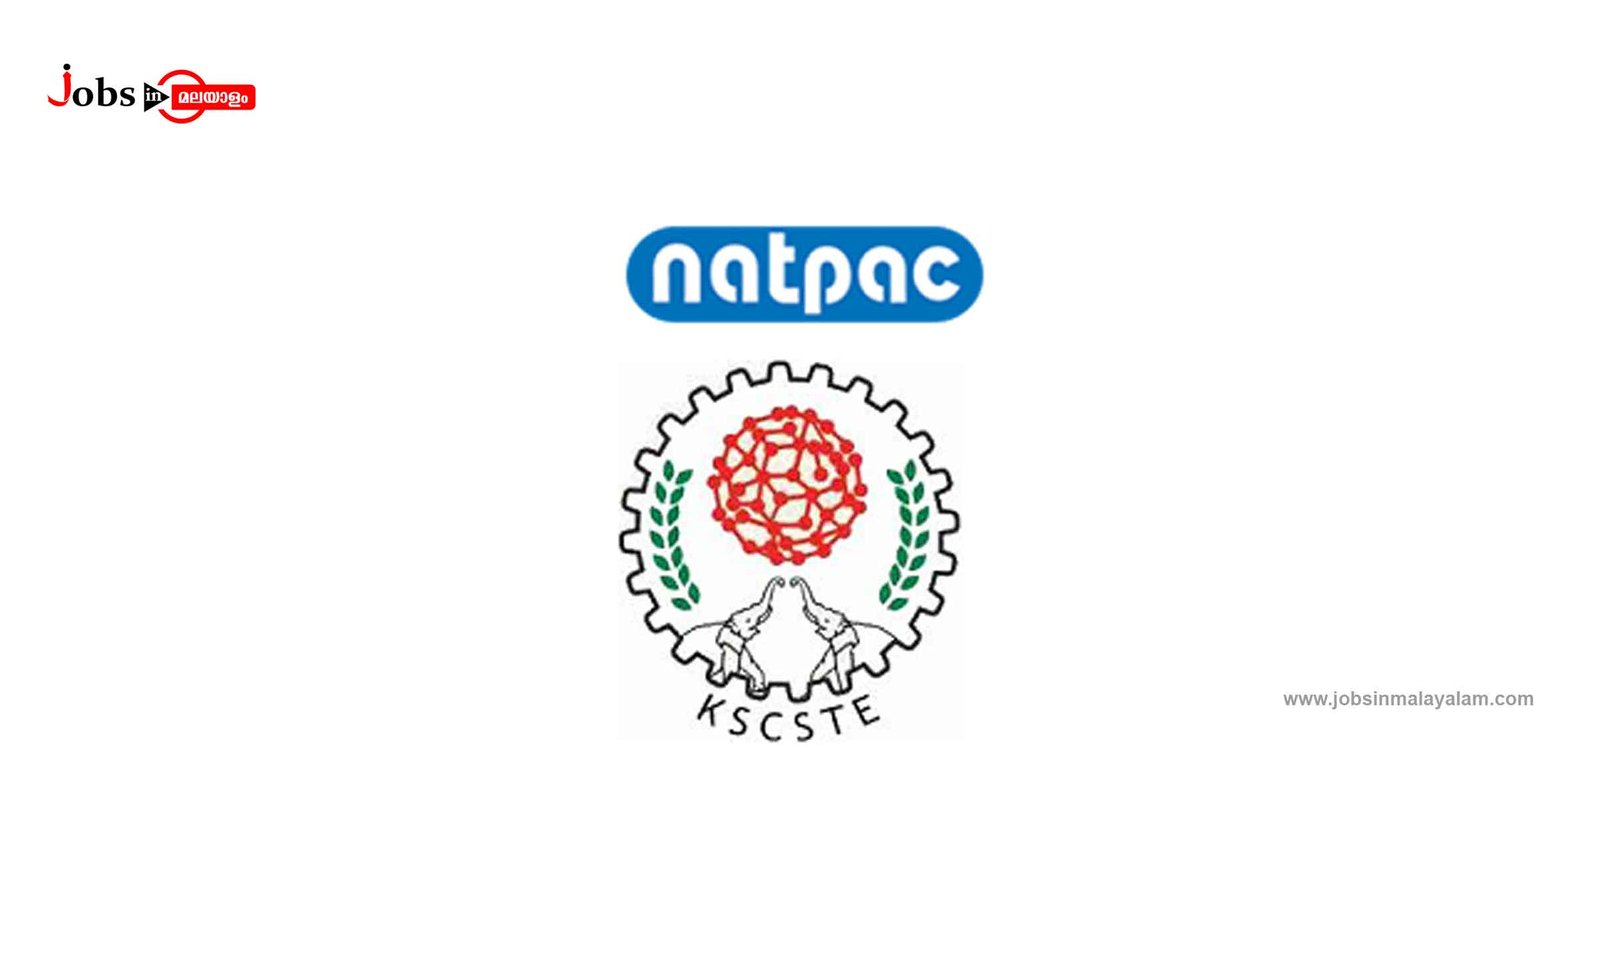 KSCSTE - National Transportation Planning and Research Centre (NATPAC)